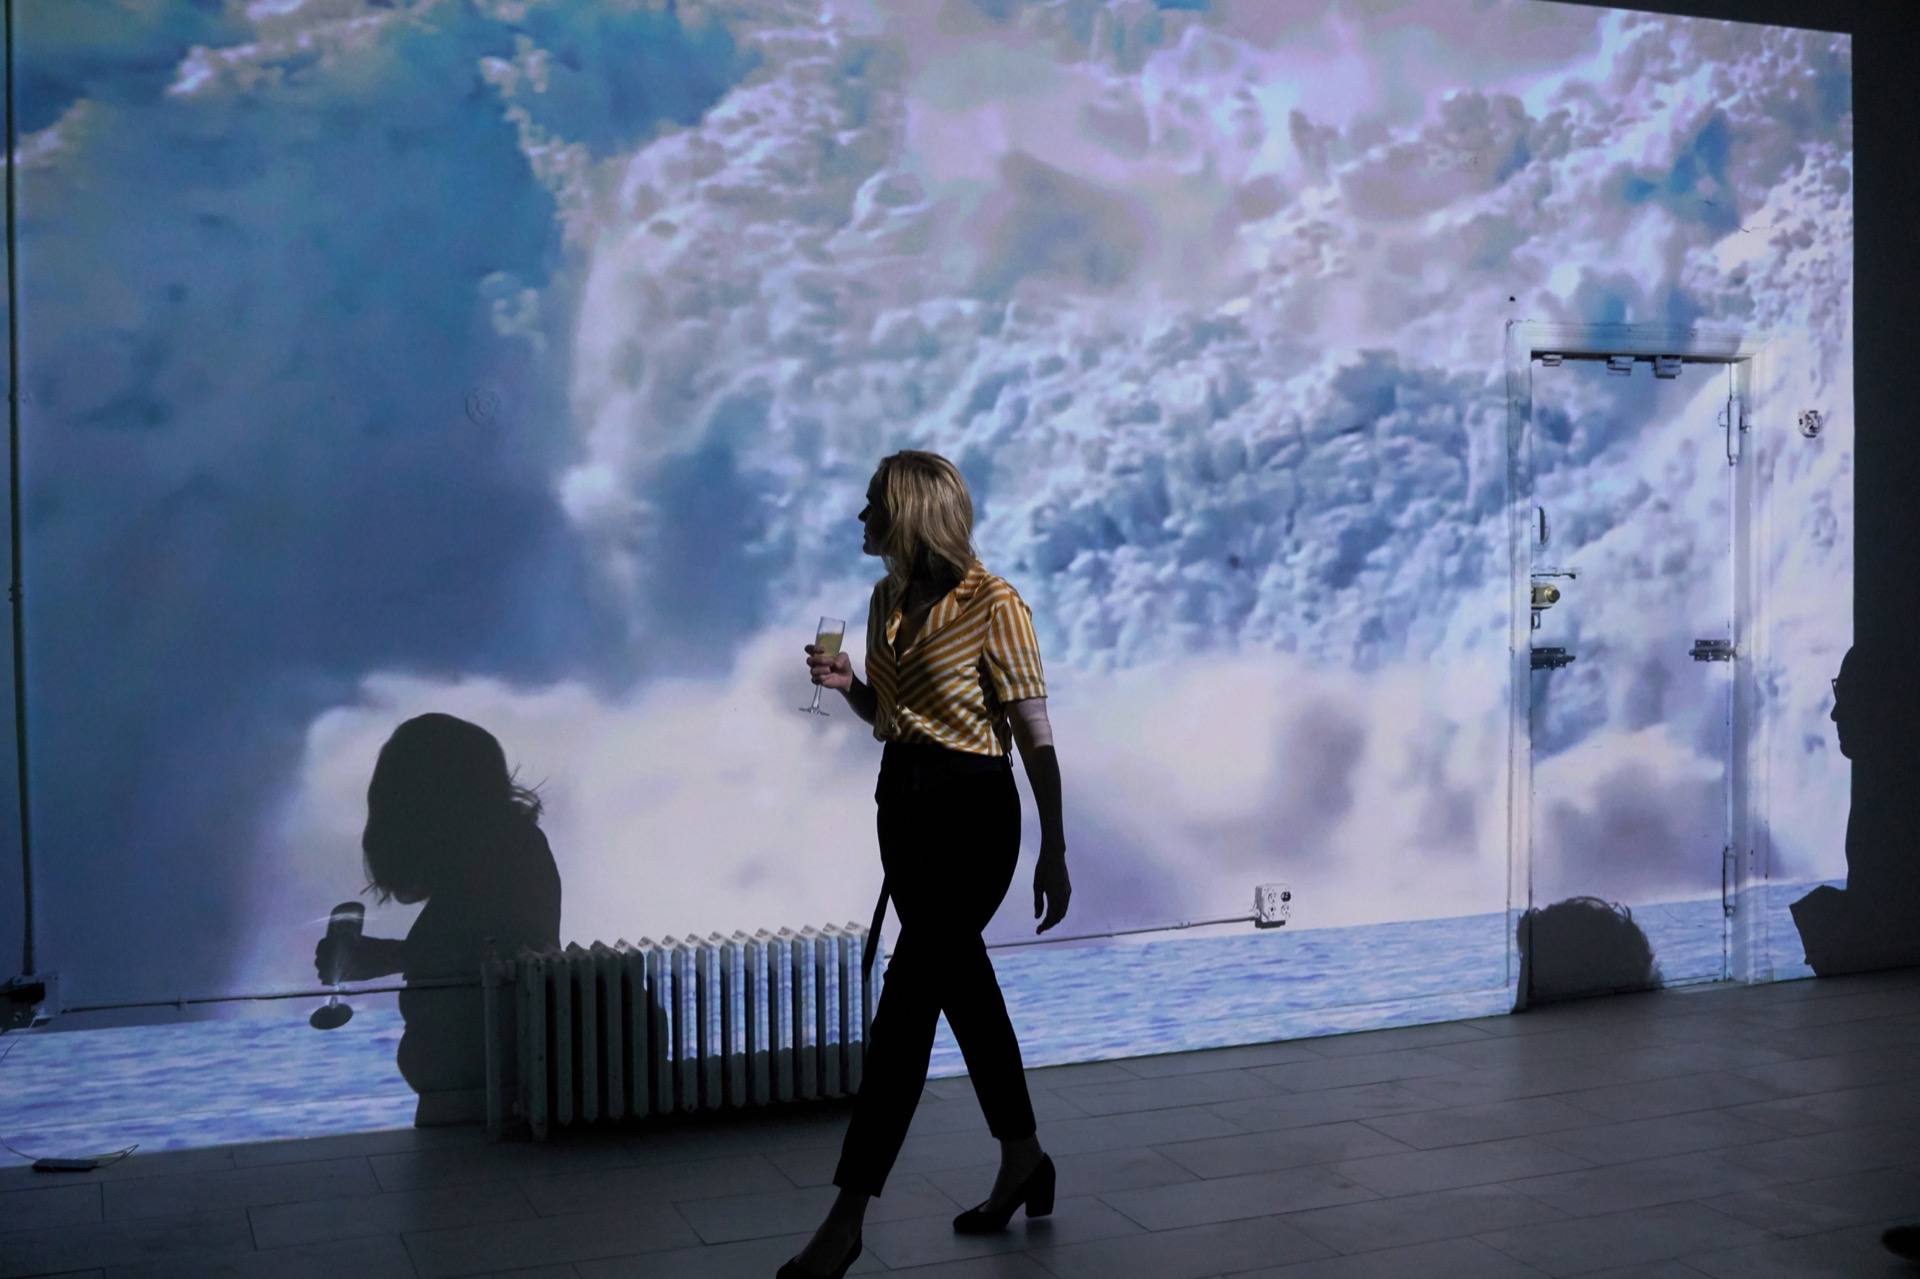 Small thumbnail image of Slighly askew photograph of a women in cocktail attire, holding a cocktail, walking in front of a projection of a glacier collapsing